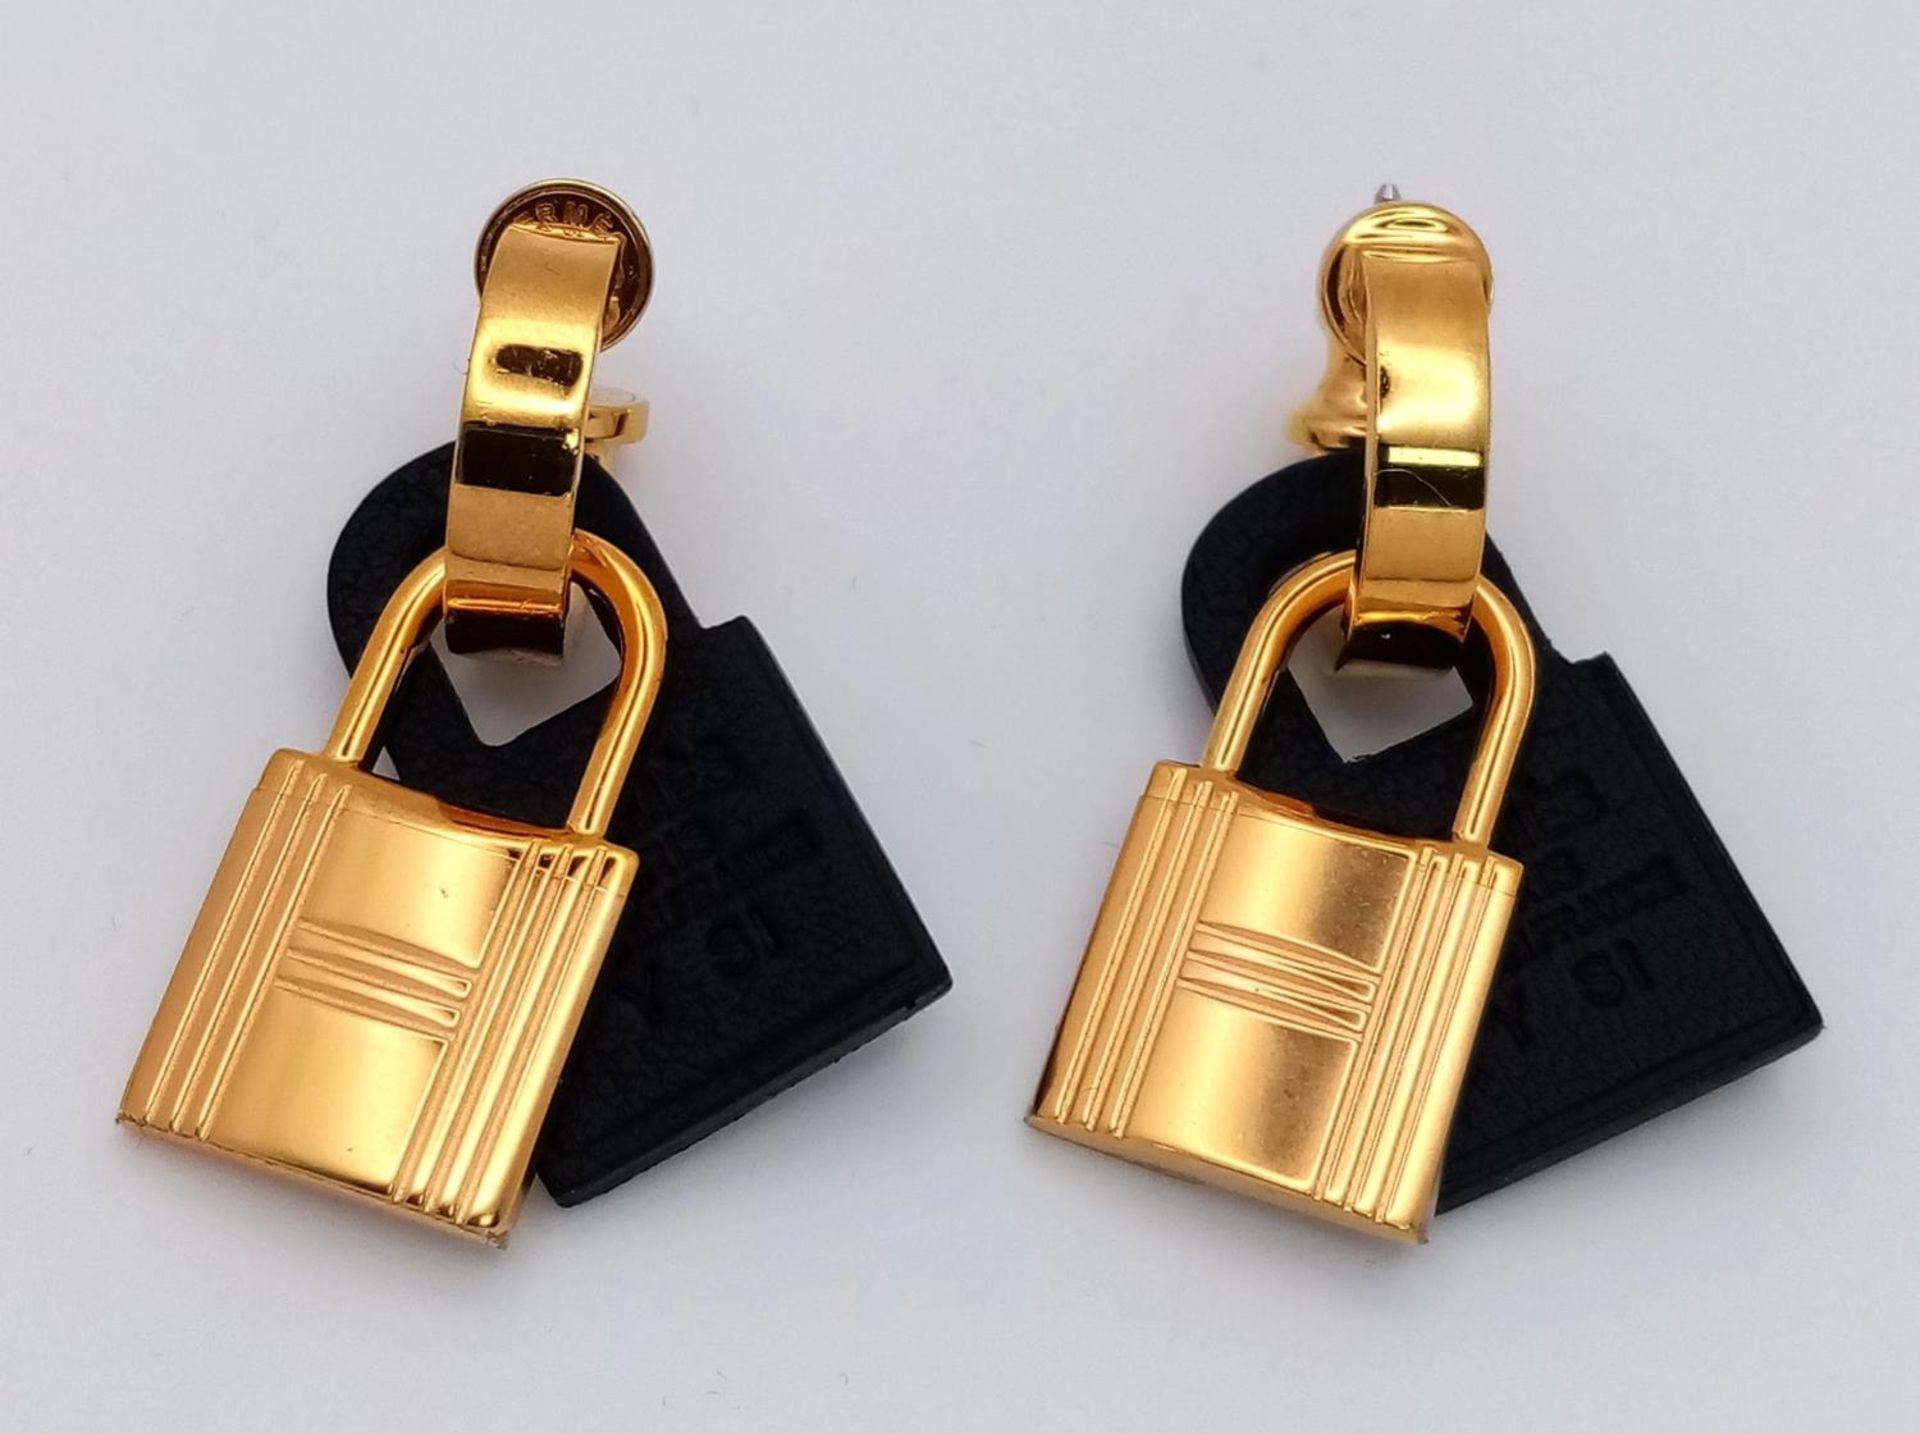 A Pair of Designer Gold Plated Hermes Padlock Earrings. Comes with original packaging.